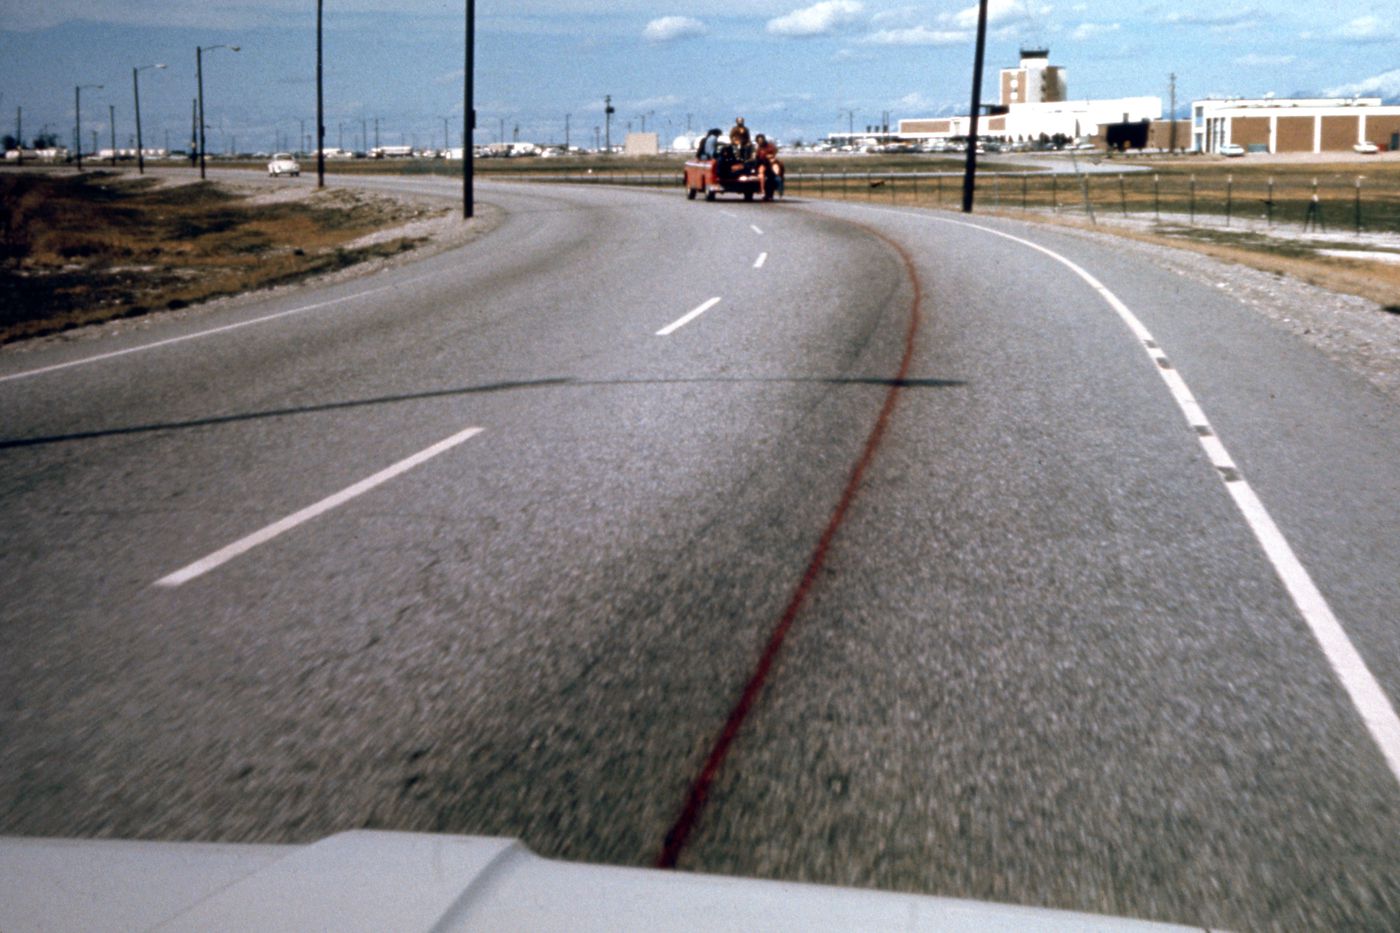 Photograph of truck spraying road for Red Line